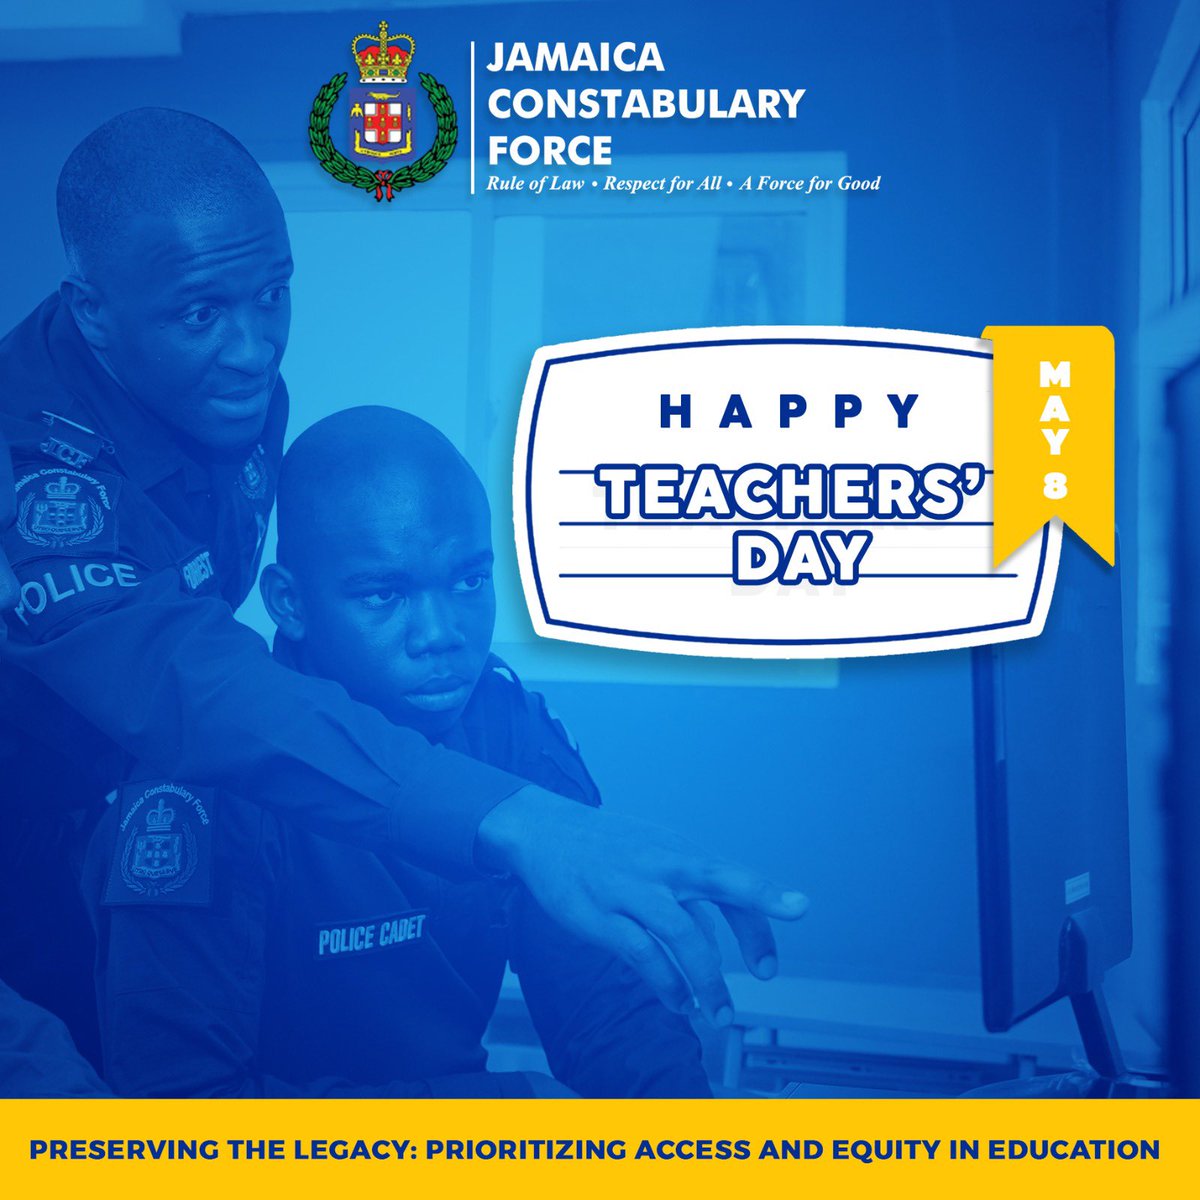 📚 The Jamaica Constabulary Force proudly stands with teachers on this special Teachers’ Day. This is because, “Education is the most powerful weapon which you can use to change the world,”—Nelson Mandela. The JCF salutes you! #TeachersDay #JCFsupportsTeachers